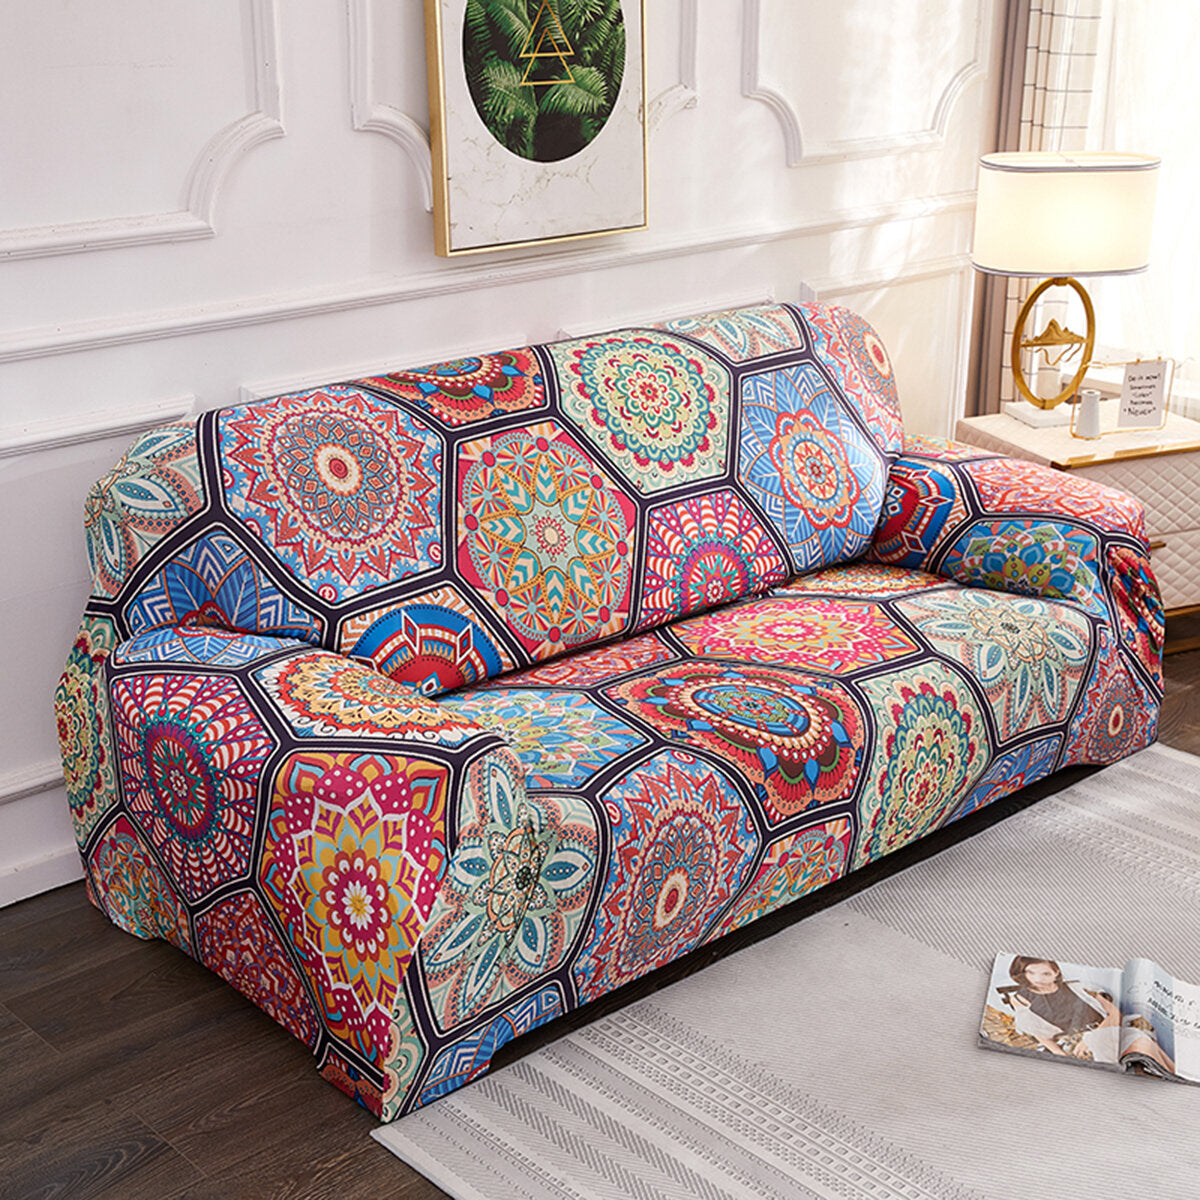 1/2/3/4 Seaters Elastic Sofa Cover Bohemian Digital Printing Chair Seat Protector Stretch Couch Slipcover Home Office Furniture Accessories Decorations